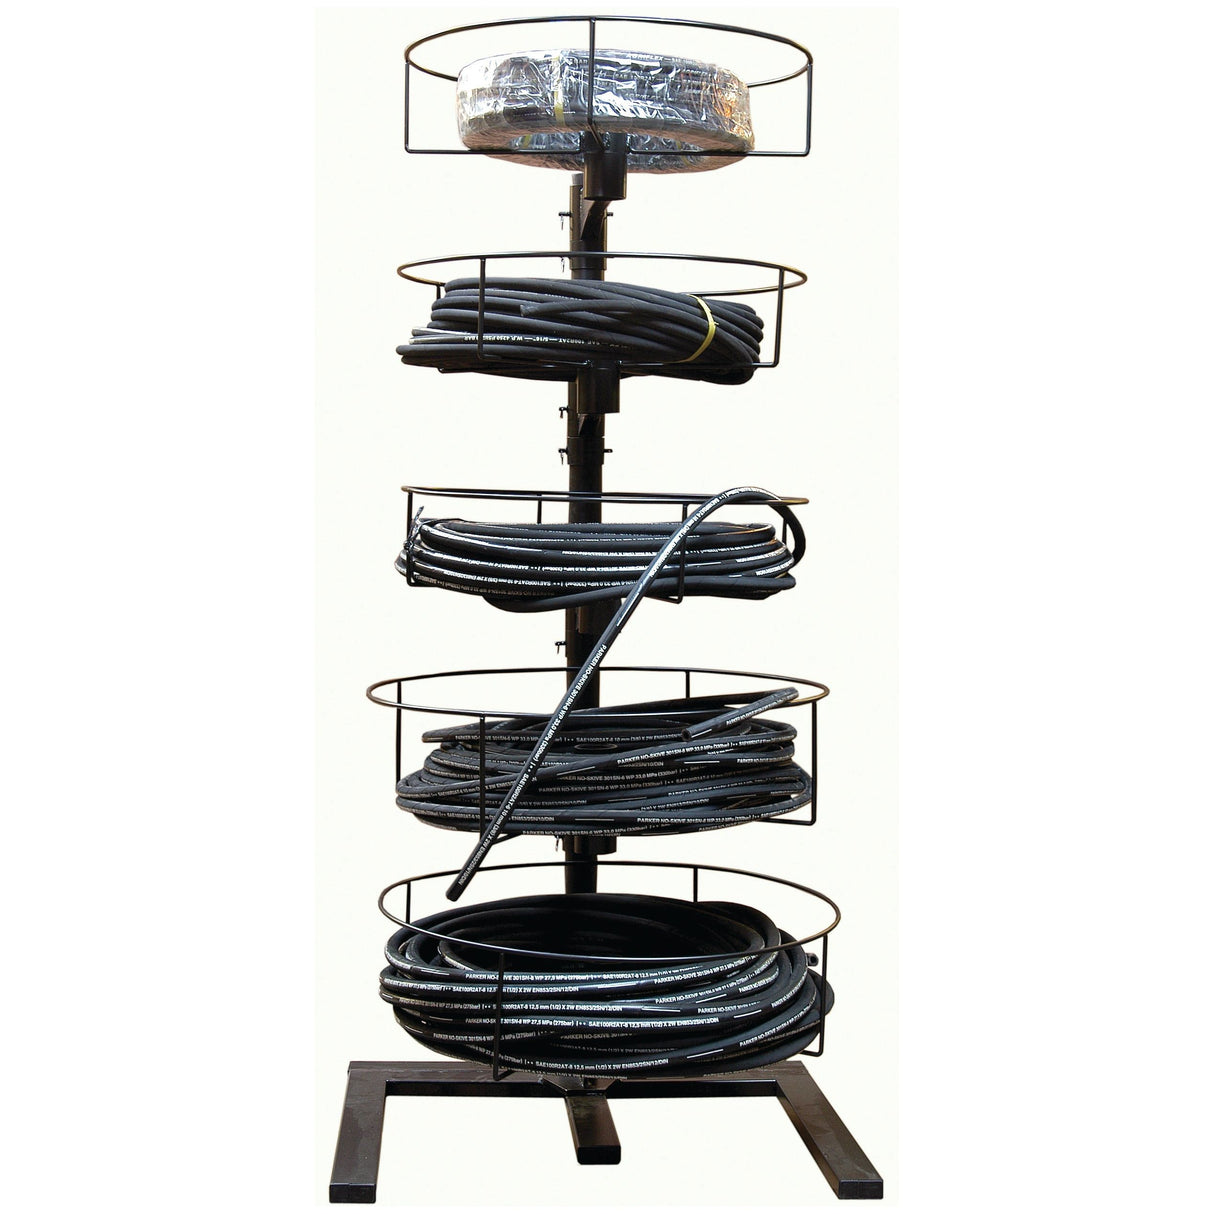 Sparex Hydraulic Hose Stand
 - S.25897 - Farming Parts